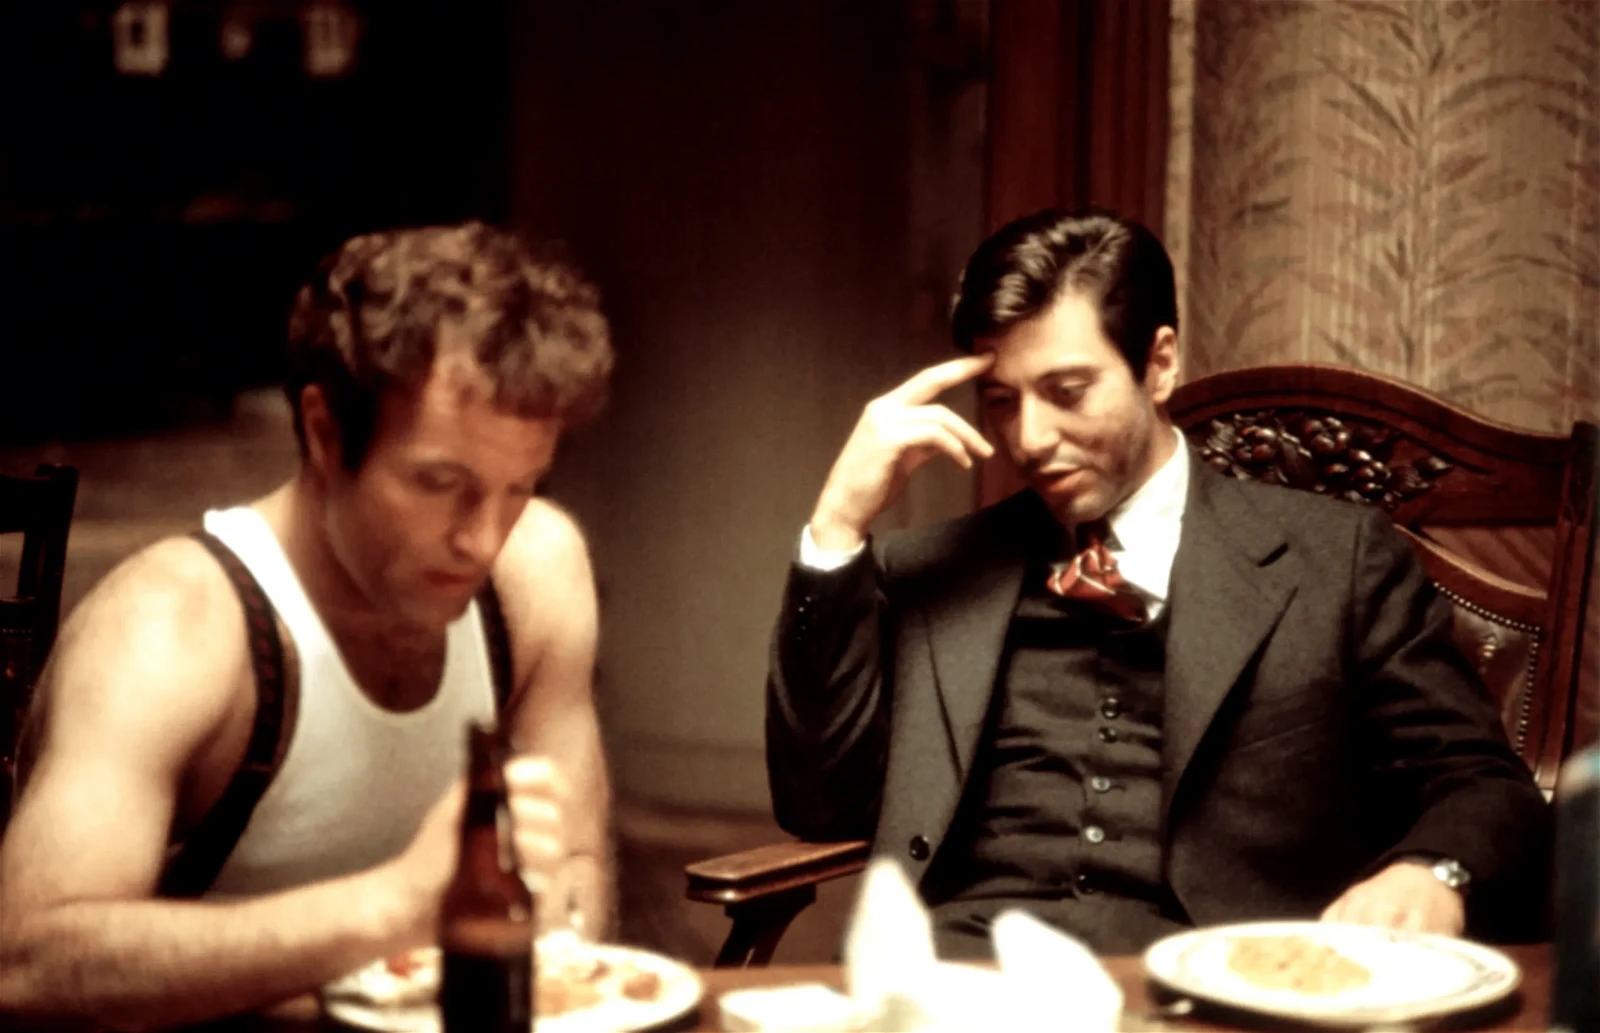 Al Pacino initially wanted to play the role of Sonny Corleone in The Godfather